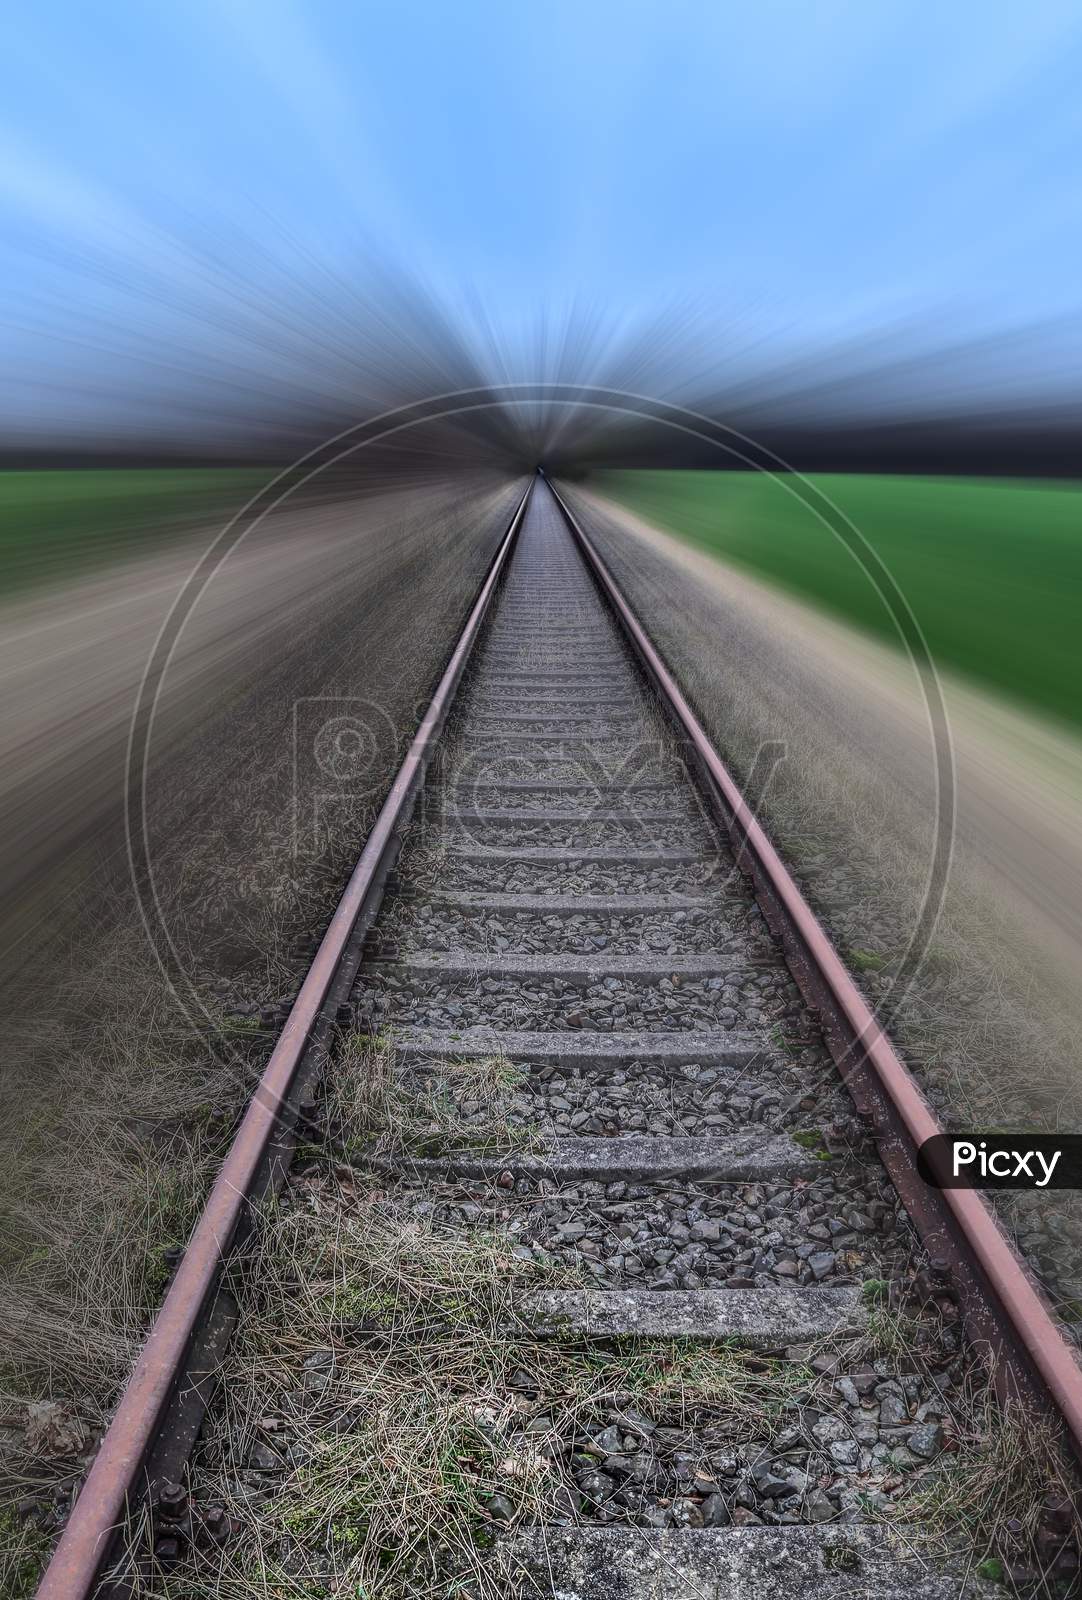 Diminishing Perspective View At A Railroad Track With A High Speed Motion Blur